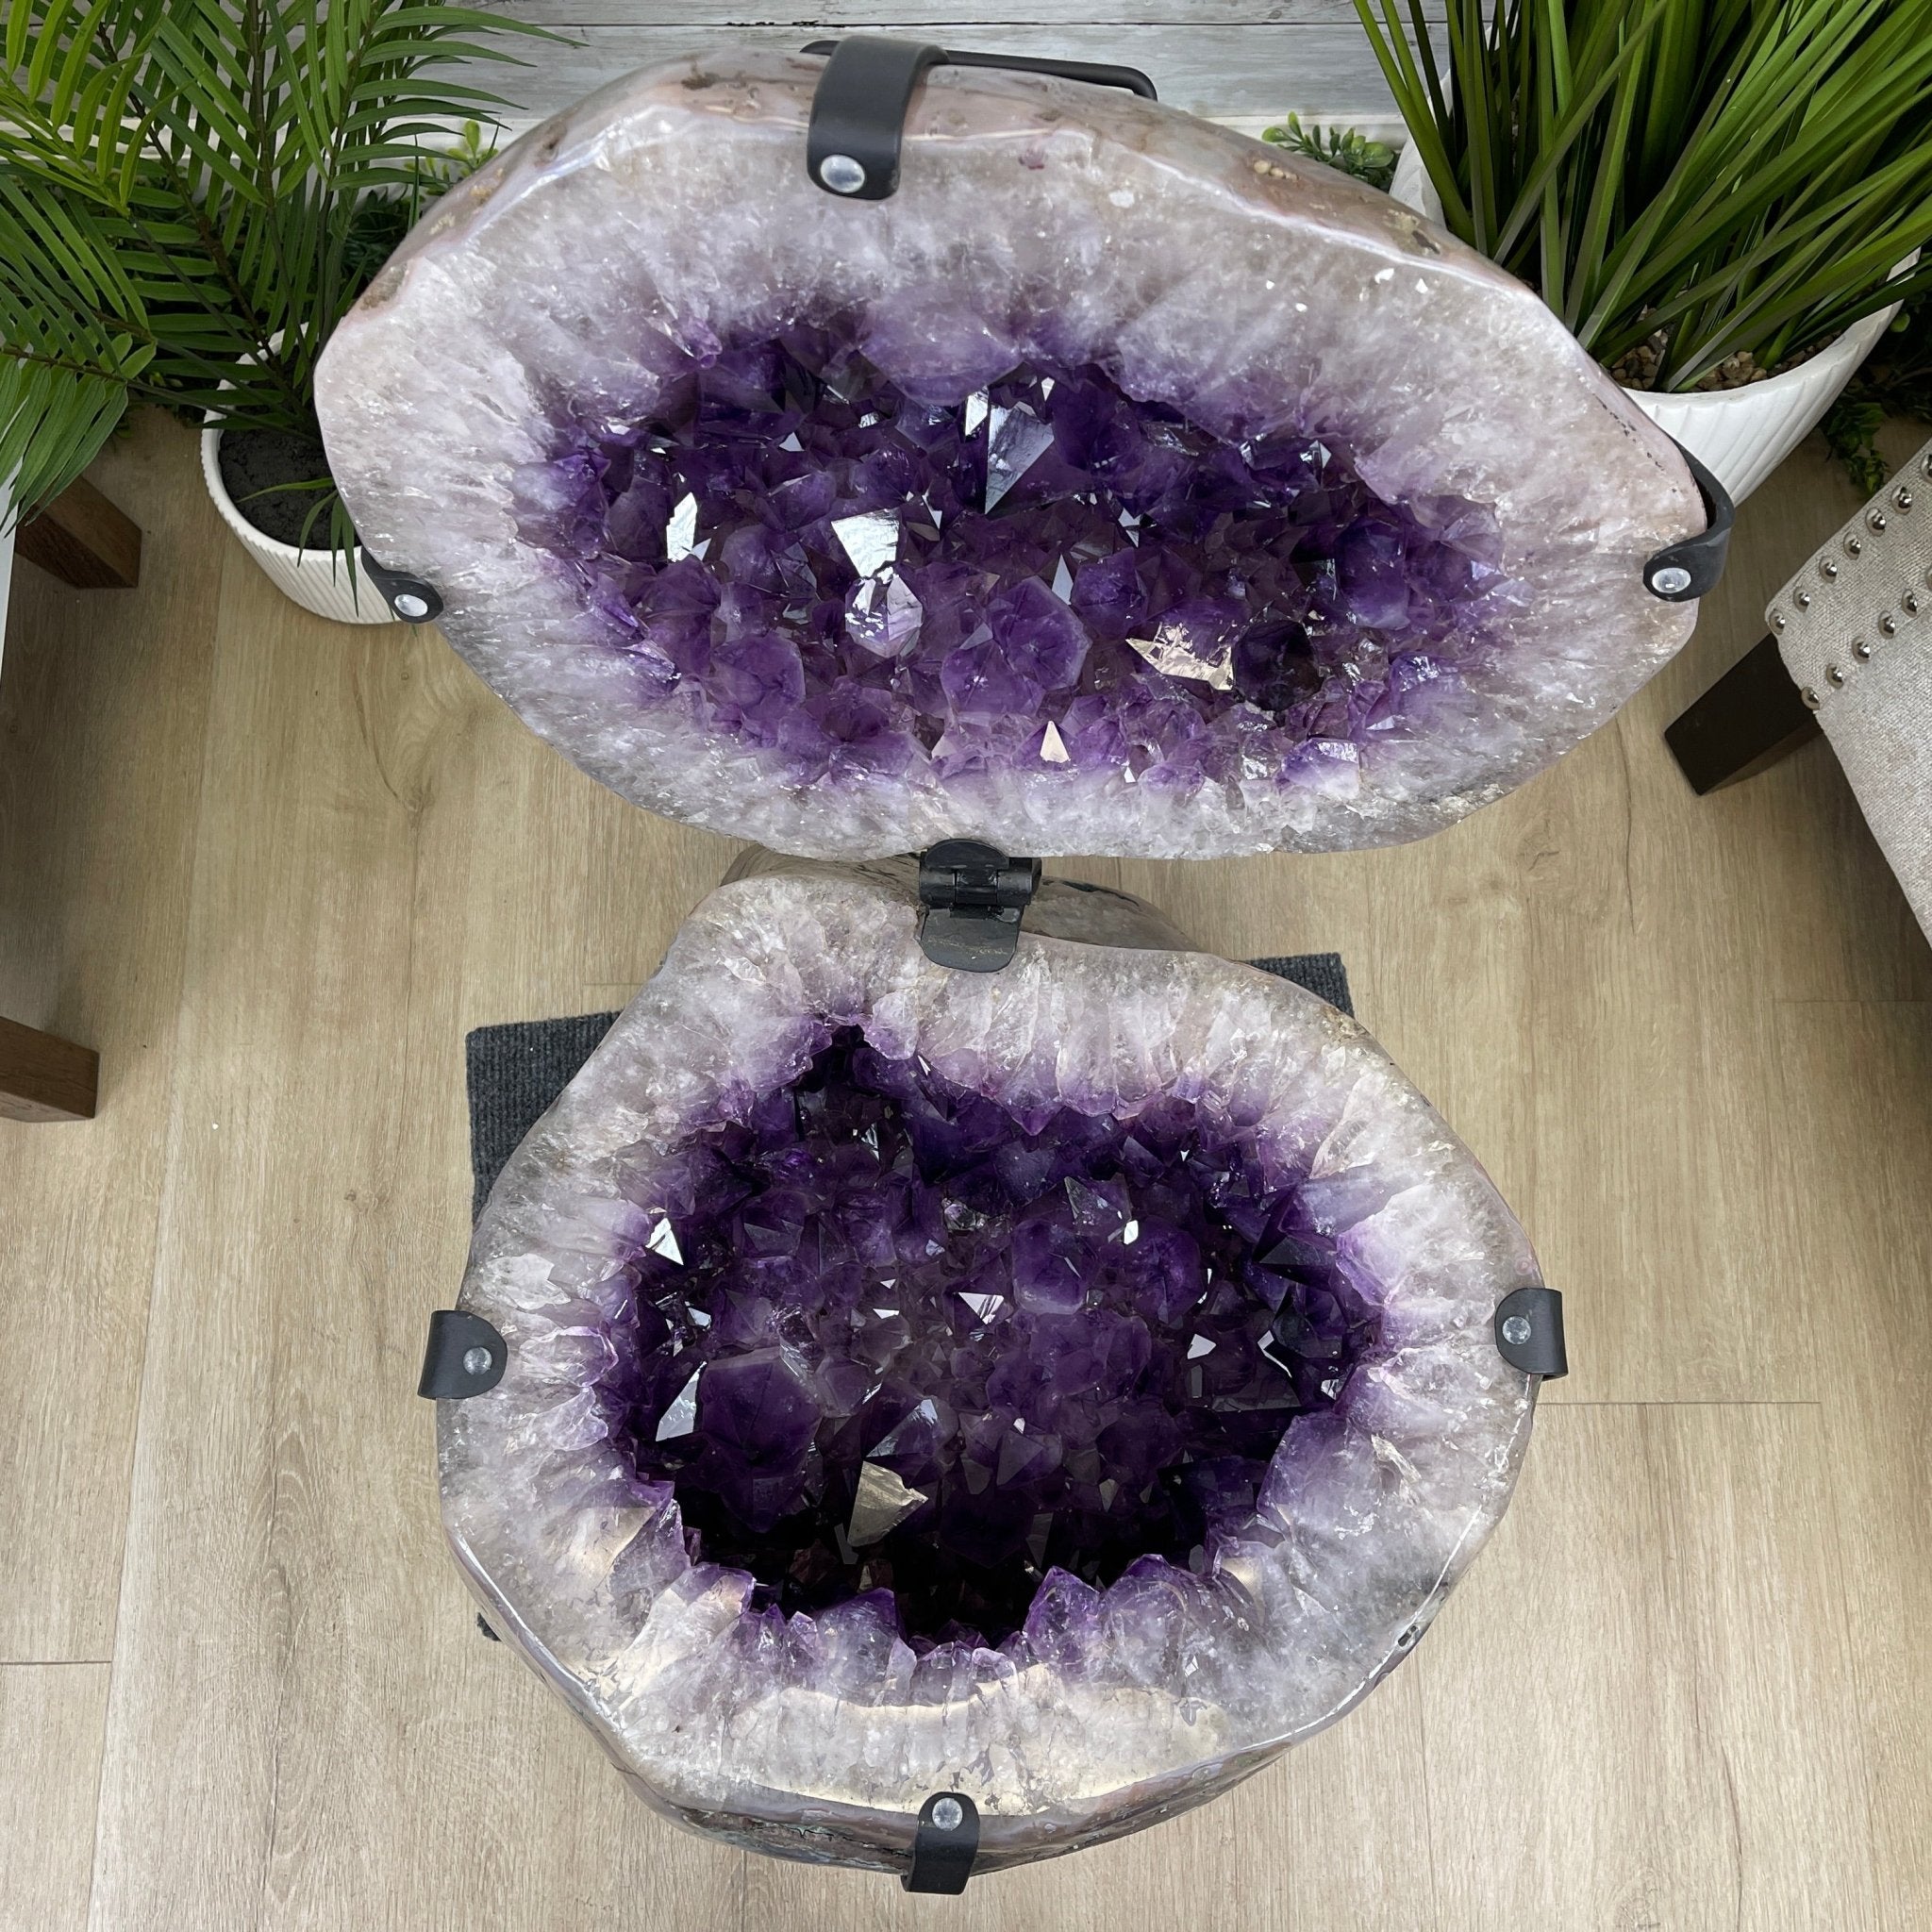 Super Quality Polished Amethyst "Jewelry Box", Clam Shell style Lid, 187.4 lbs & 24" tall, Model #5656-0007 by Brazil Gems - Brazil GemsBrazil GemsSuper Quality Polished Amethyst "Jewelry Box", Clam Shell style Lid, 187.4 lbs & 24" tall, Model #5656-0007 by Brazil GemsGeode Jewelry Boxes5656-0007